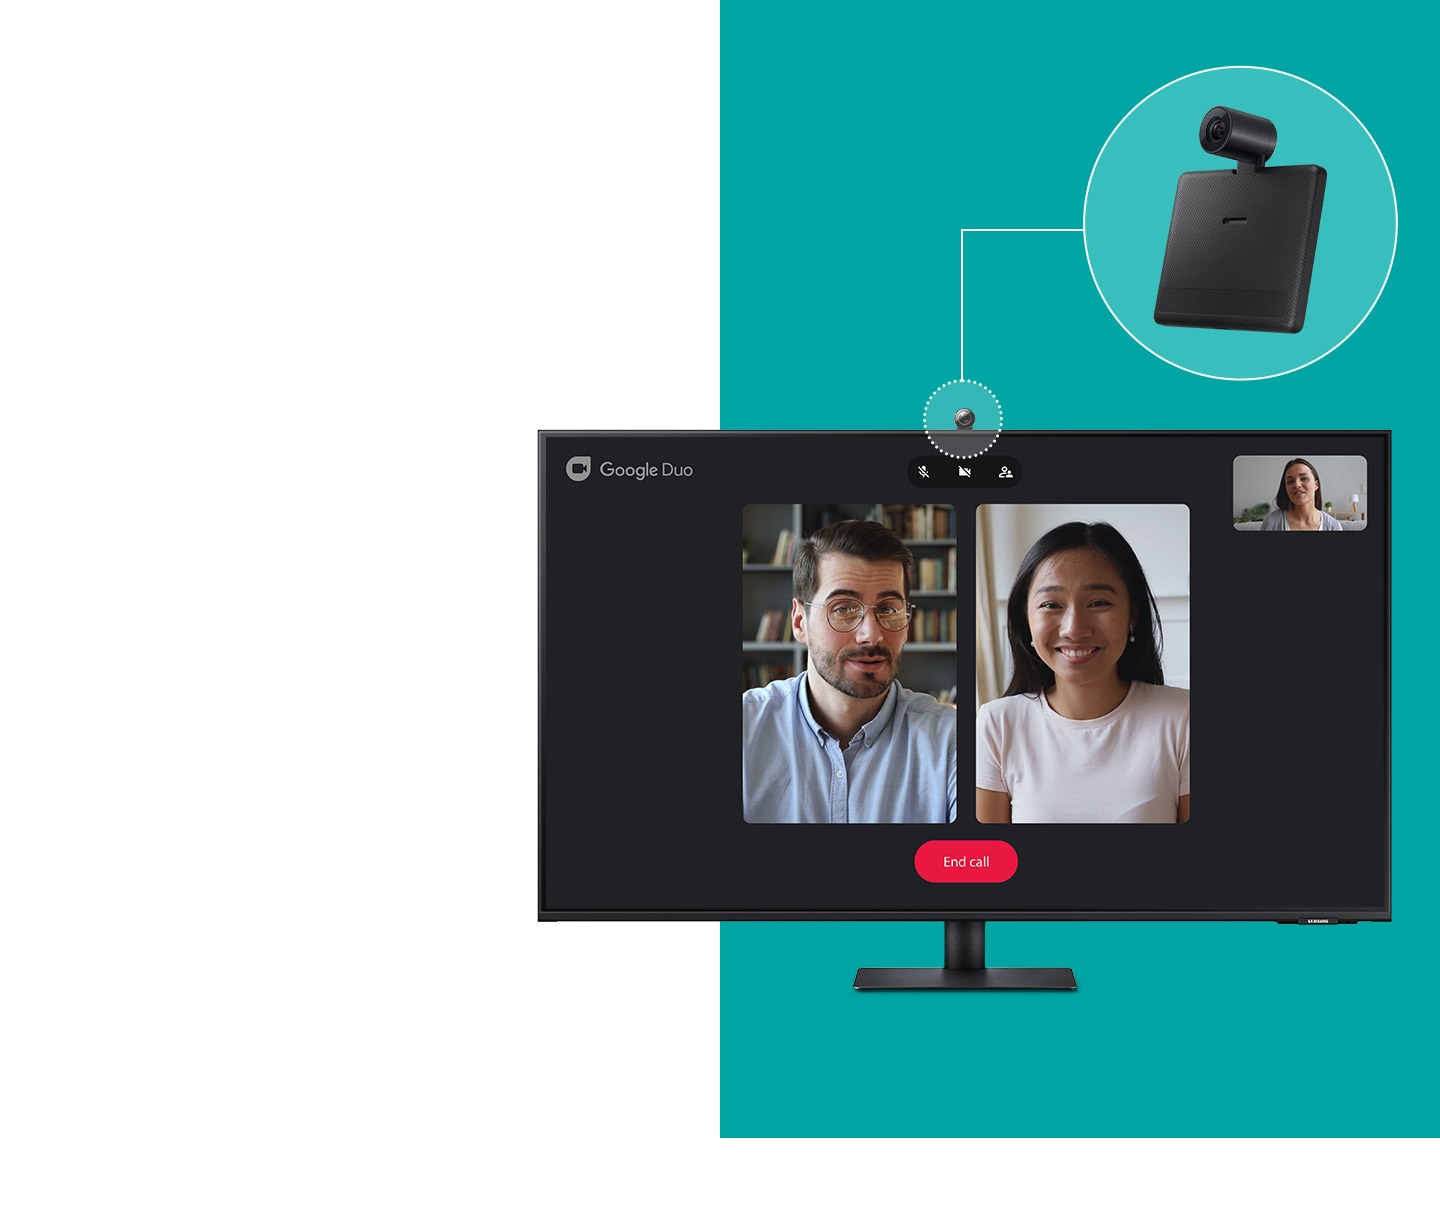 M7 Smart Monitor now has a circular camera attached to its top. On the screen shows the interface of the Google Duo chat application with three other users participating in a video call.